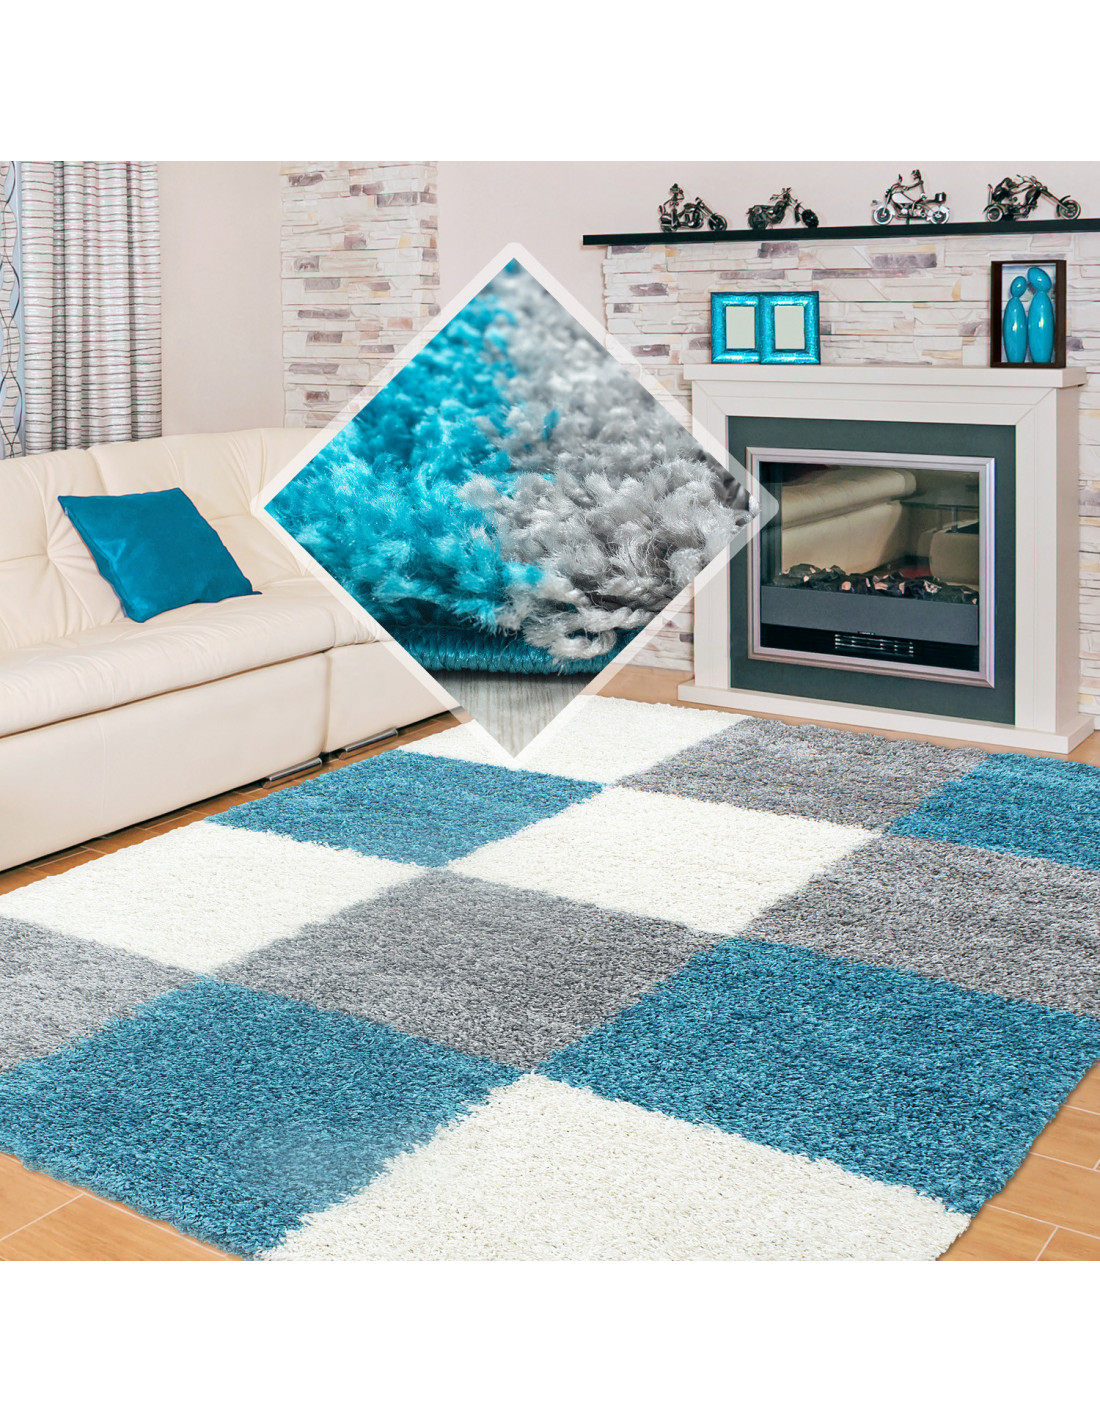 Shaggy carpet with long pile, two colors, different sizes and colors